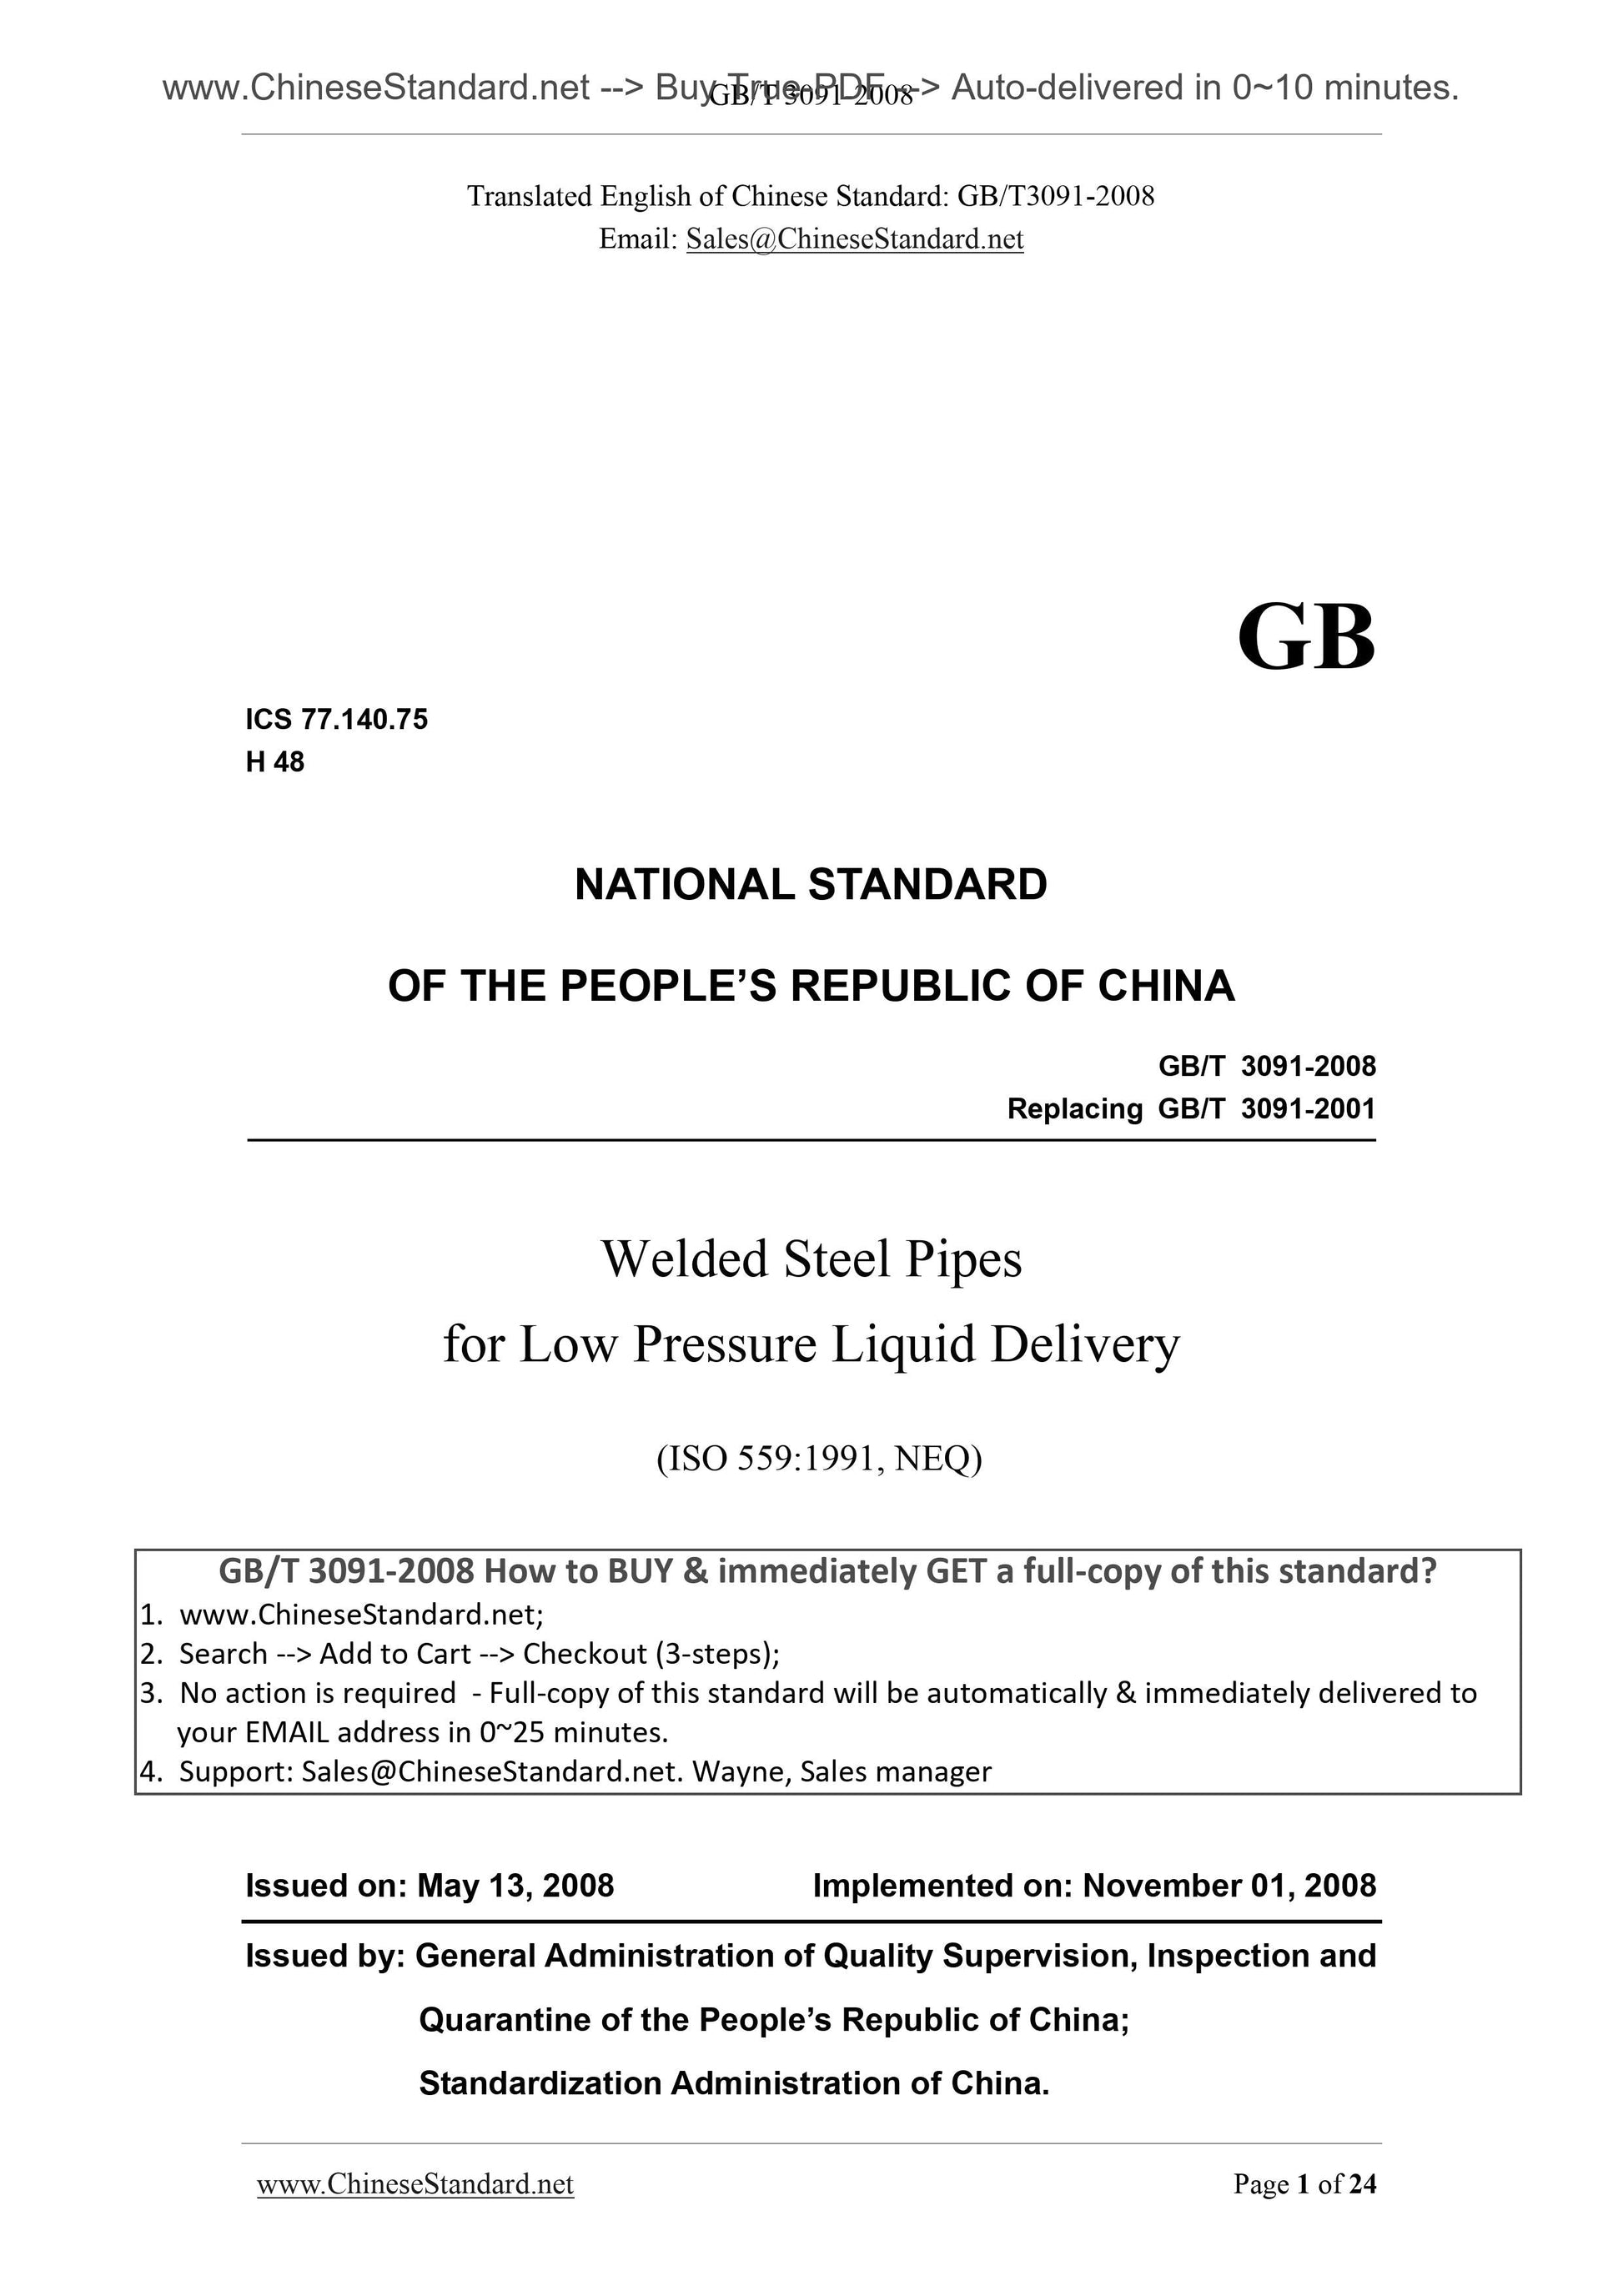 GB/T 3091-2008 Page 1